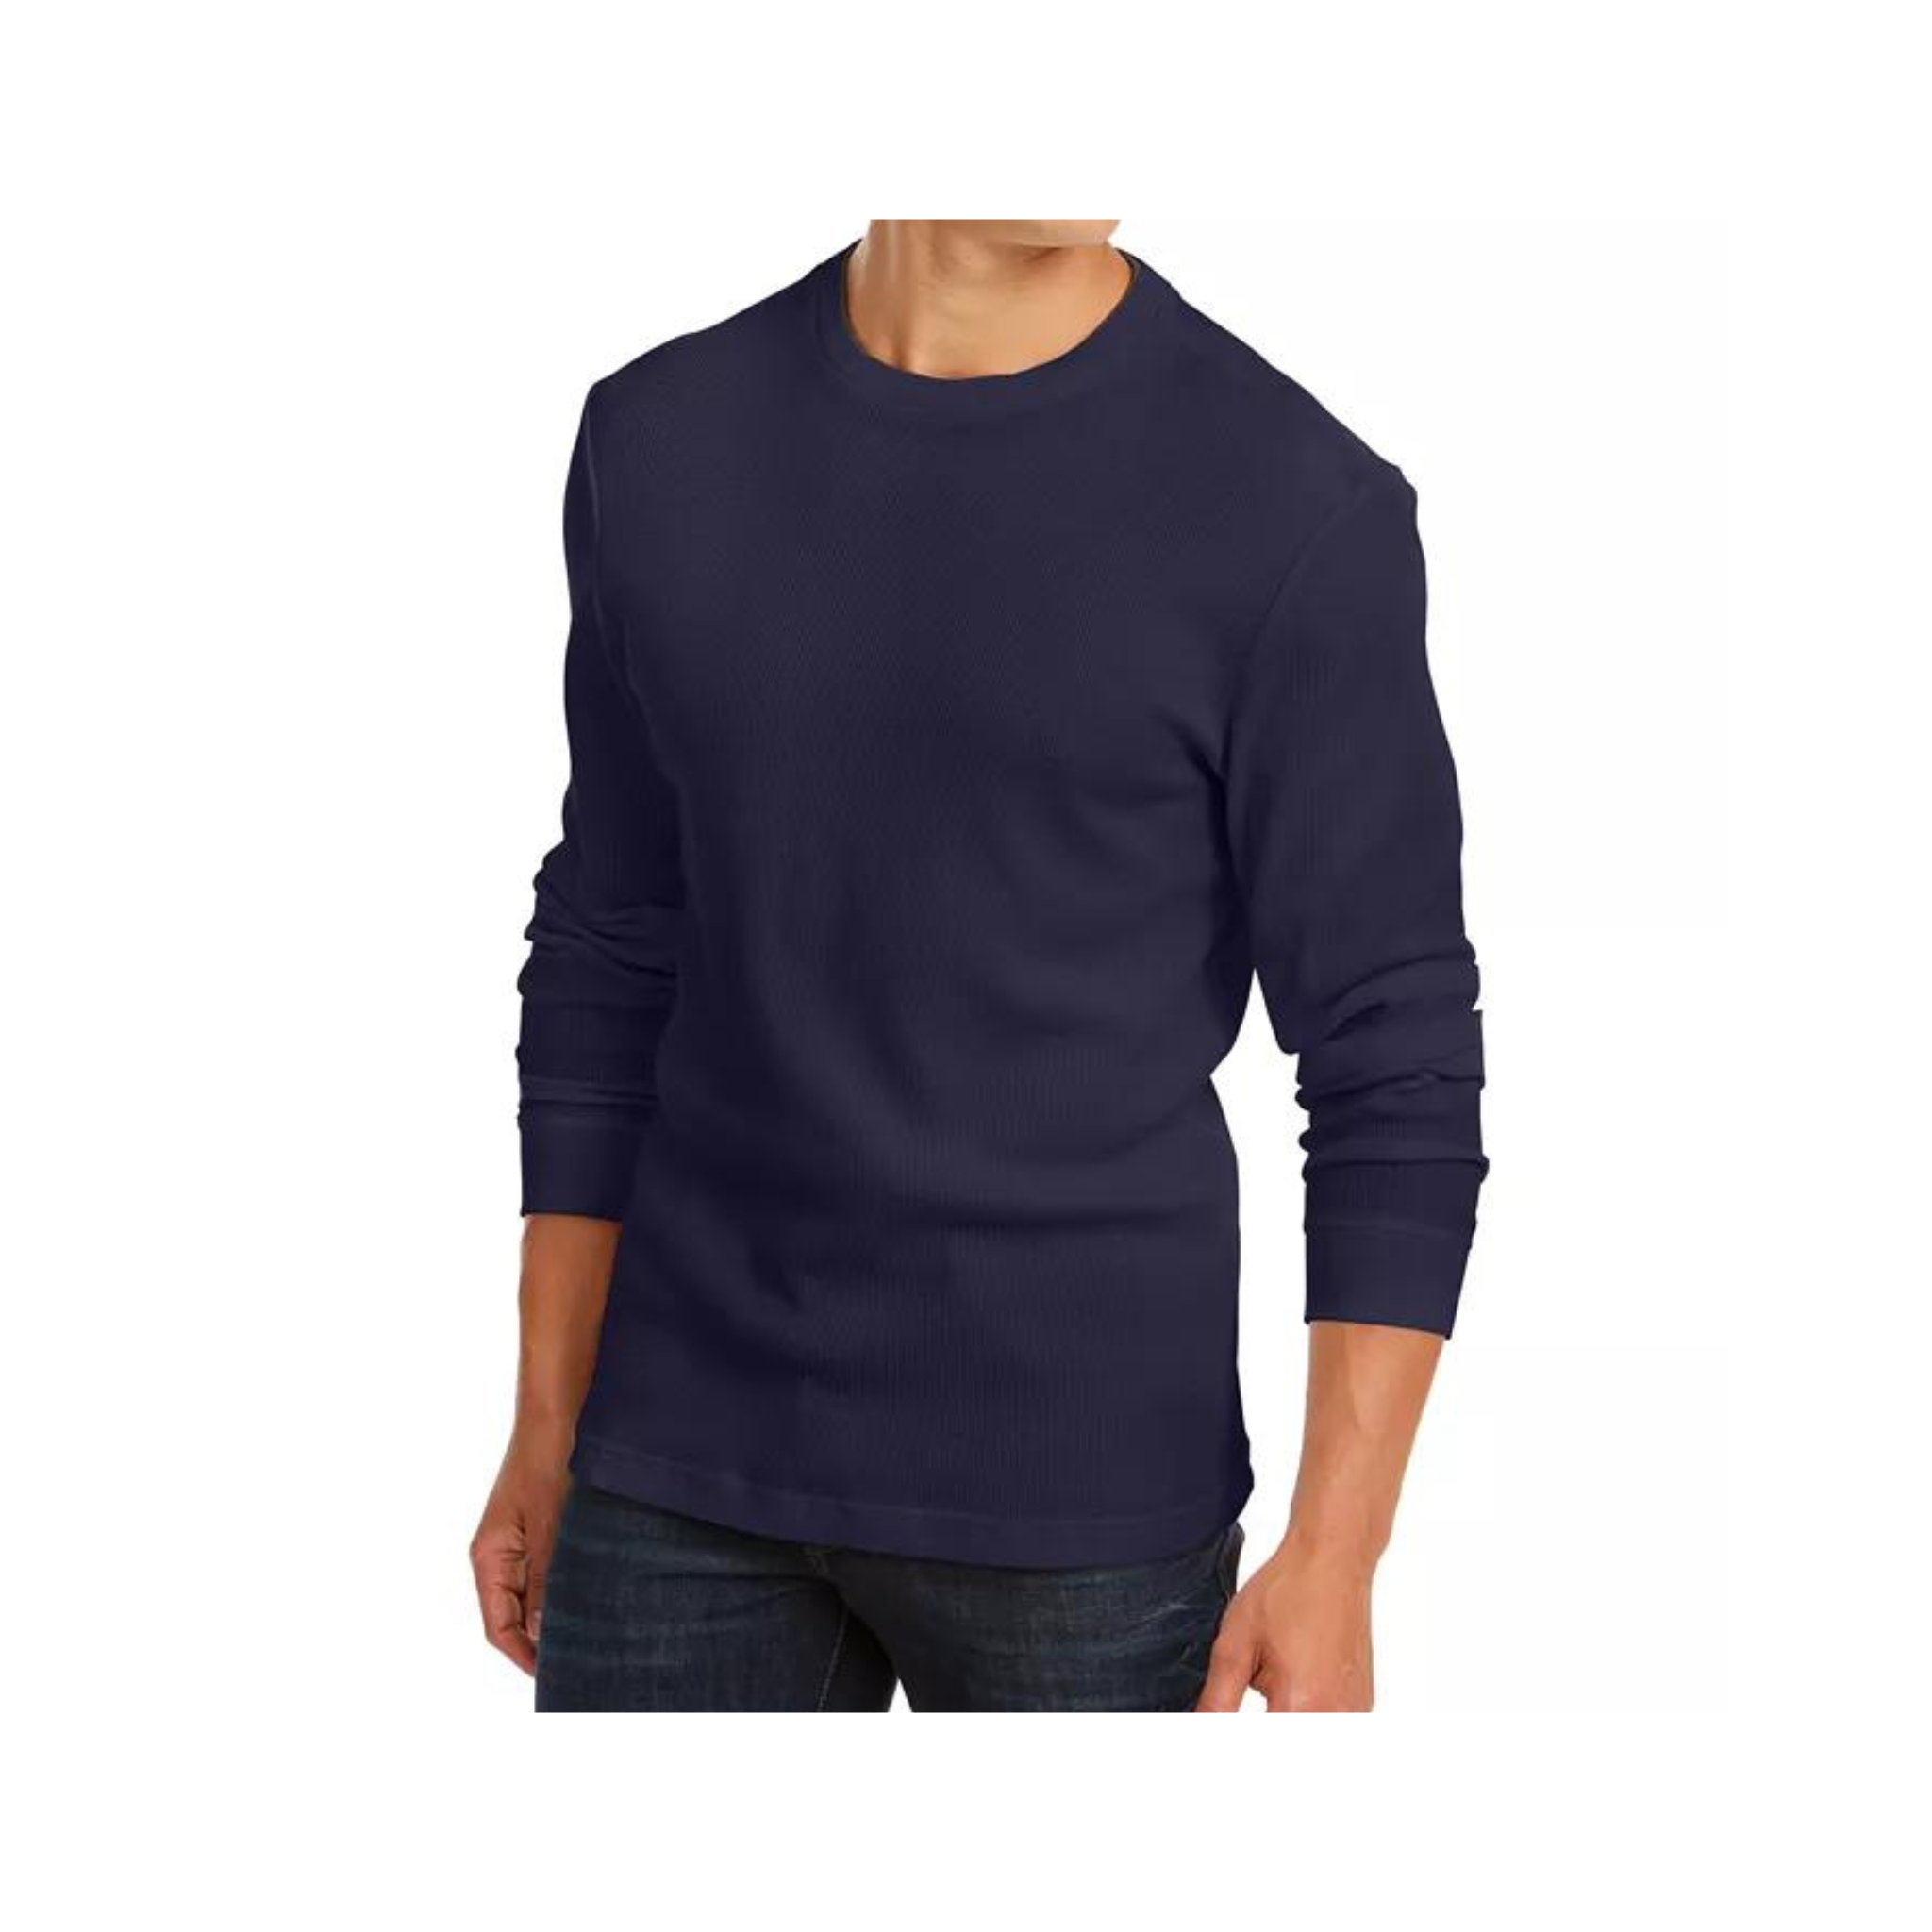 Men's Shirts and Sweaters On Sale